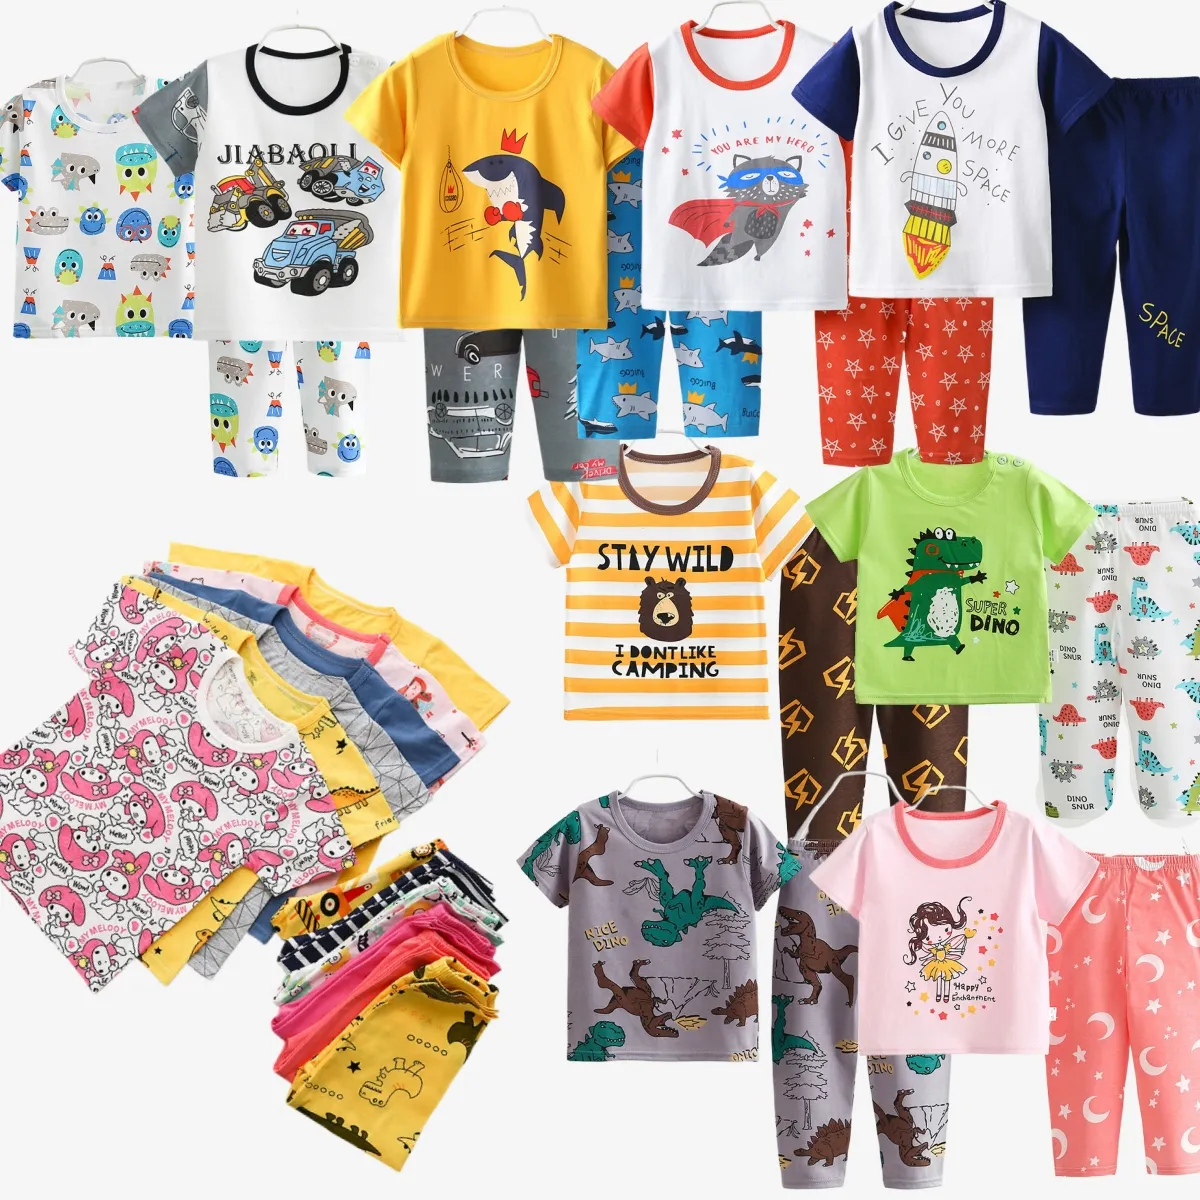 Boys clothing sets tshirt & pants 2 pieces set with cartoon prints kids clothes set girls 8-12 years of age